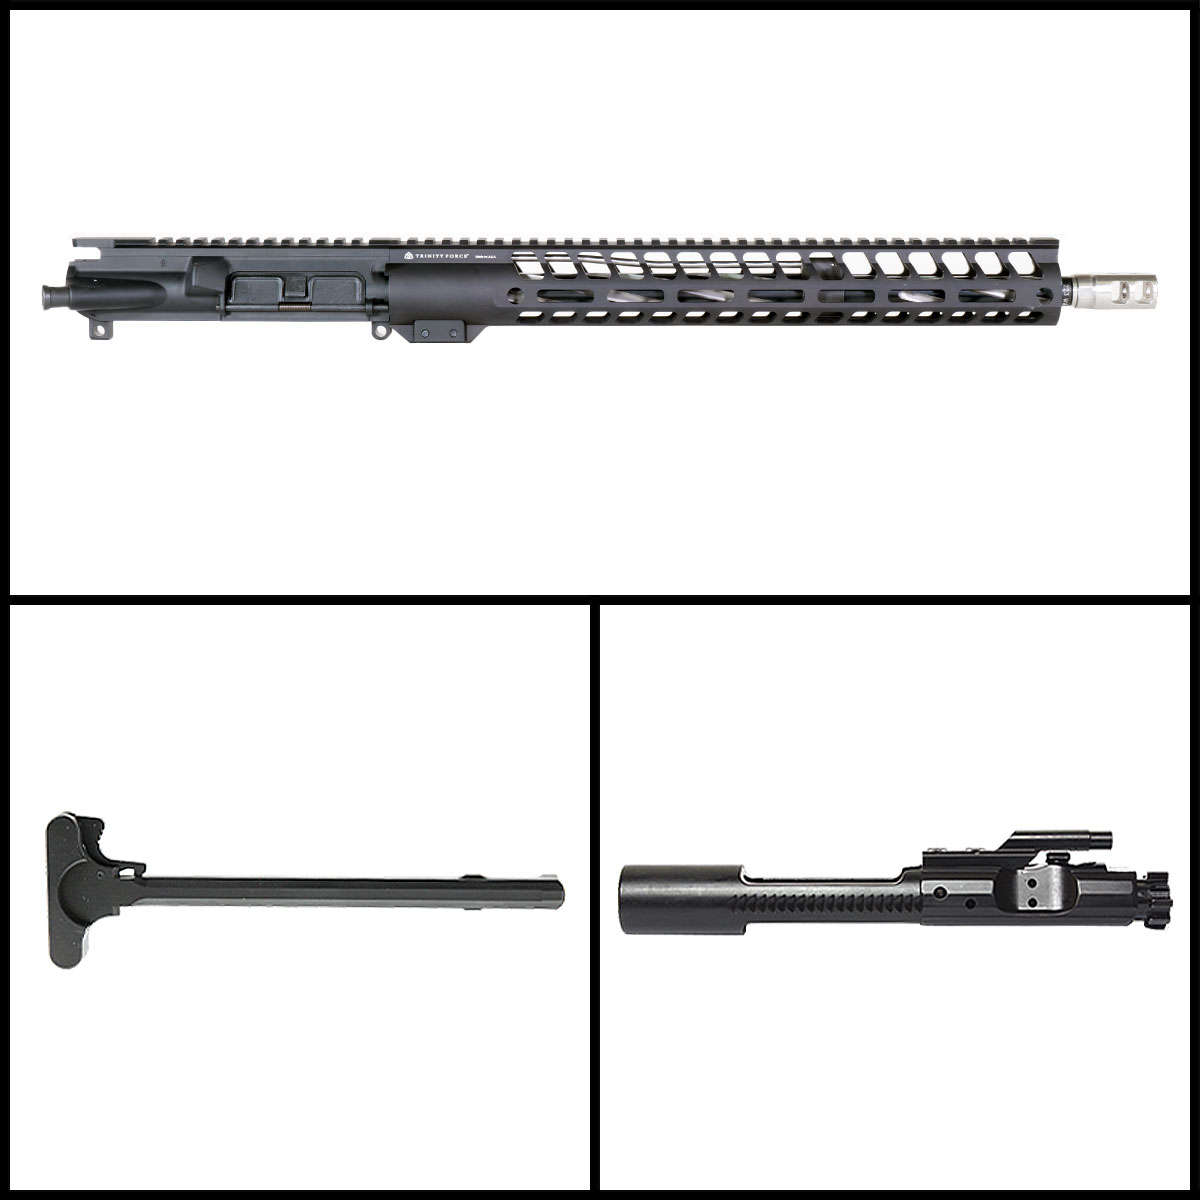 Davidson Defense 'Honorable Fisticuffs' 16-inch AR-15 .223 Wylde Nitride Rifle Complete Upper Build